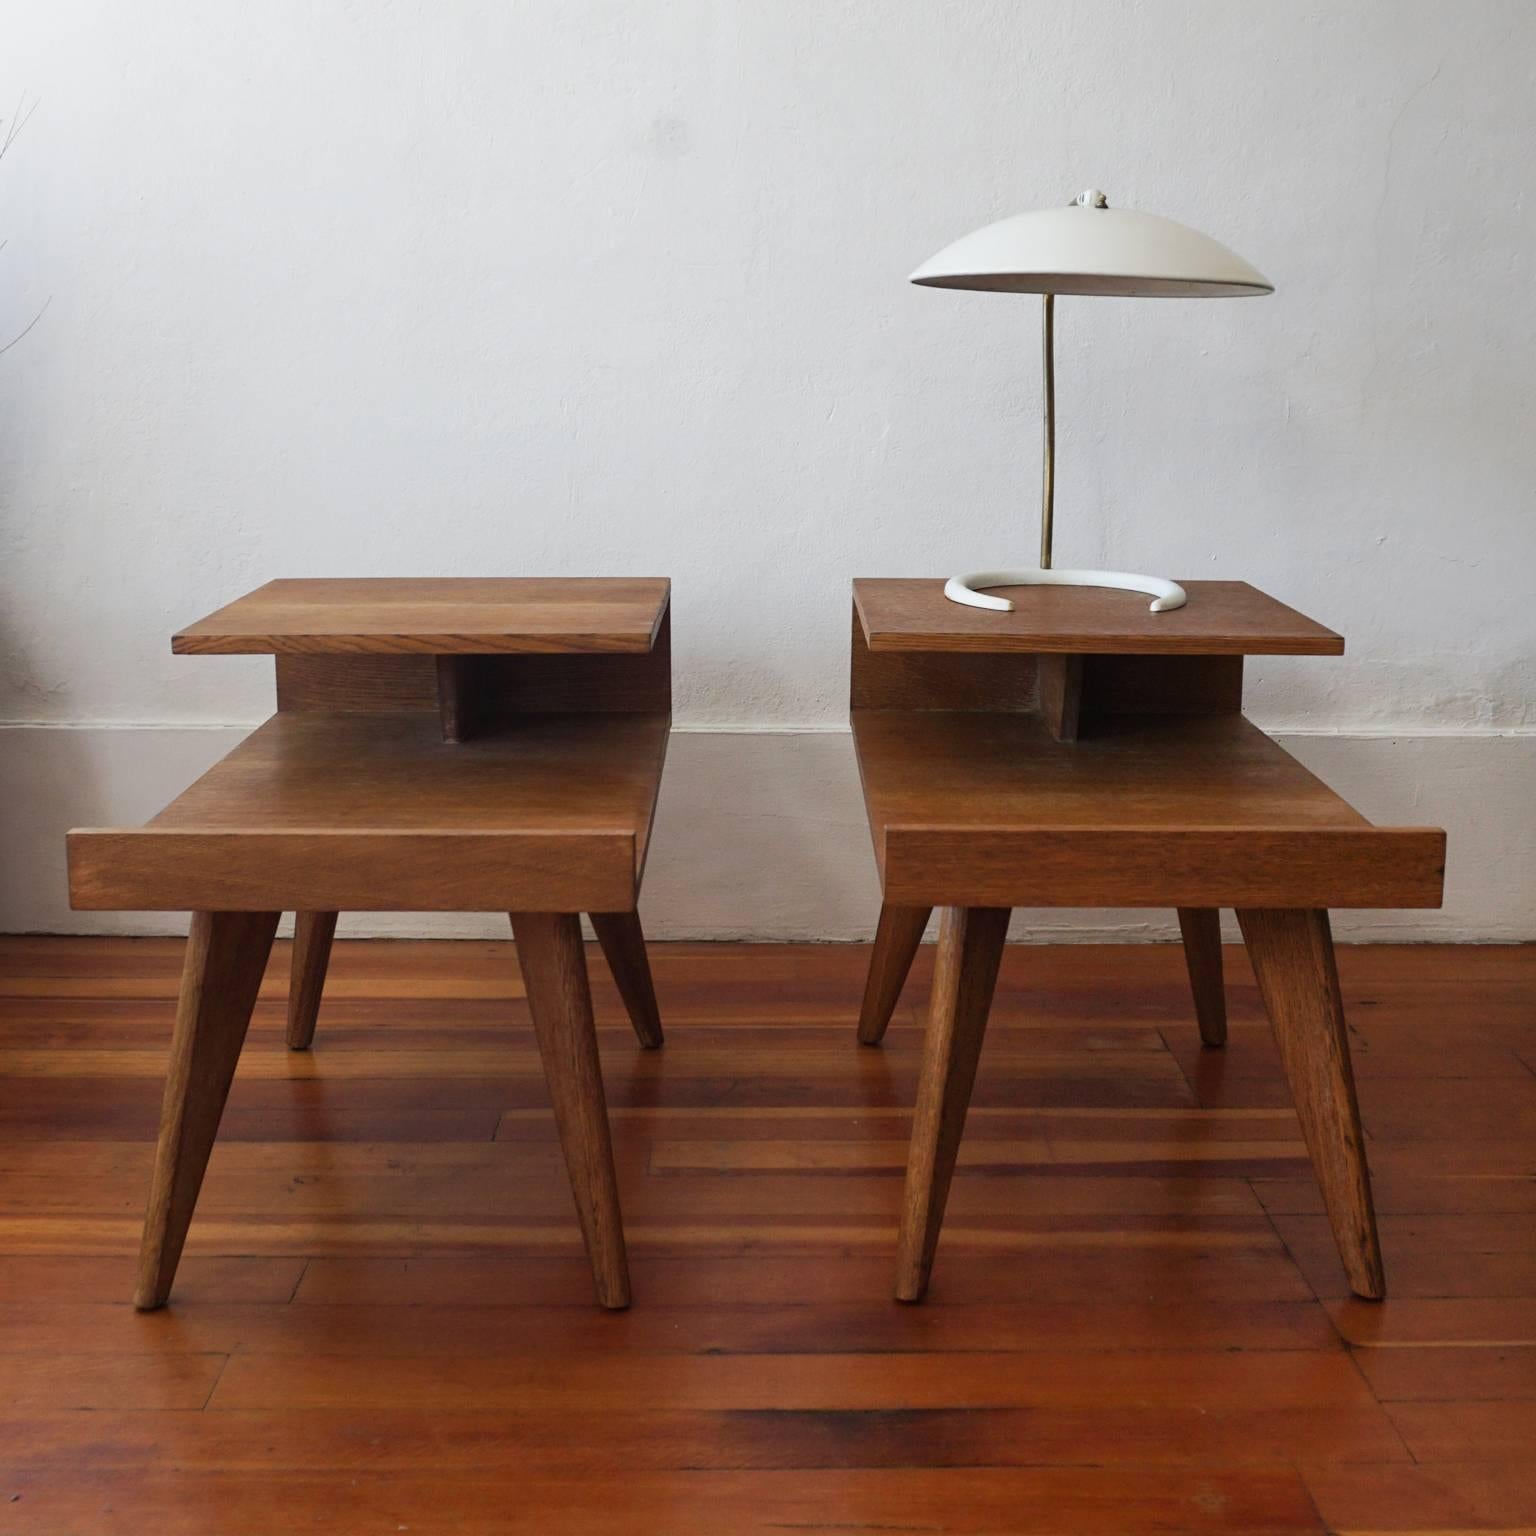 A pair of end tables designed by Dan Johnson for Los Angeles-based company, Hayden Hall. Original mahogany finish. Only made for one year, 1947. A great architectural design.